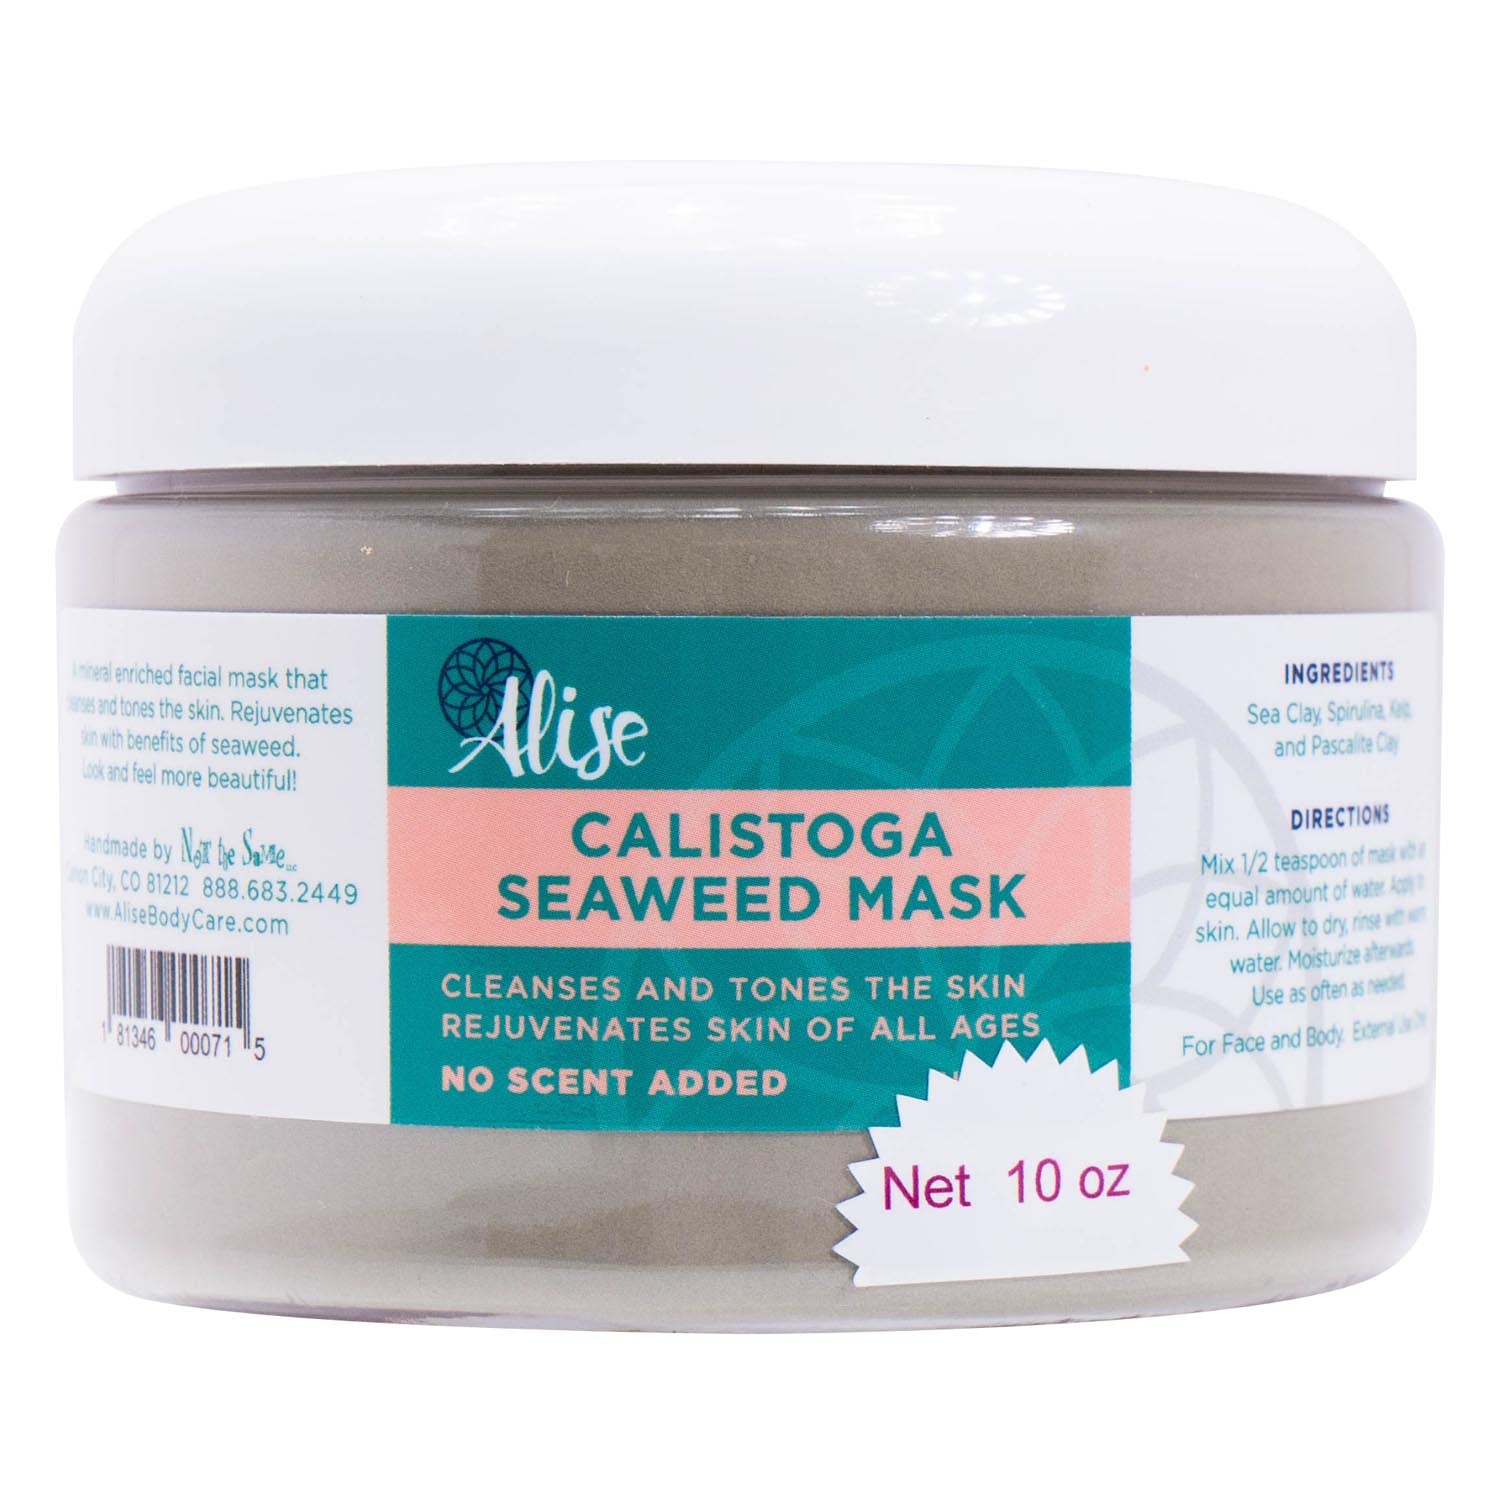 Calistoga Seaweed Mask 10oz handcrafted by Alise Body Care